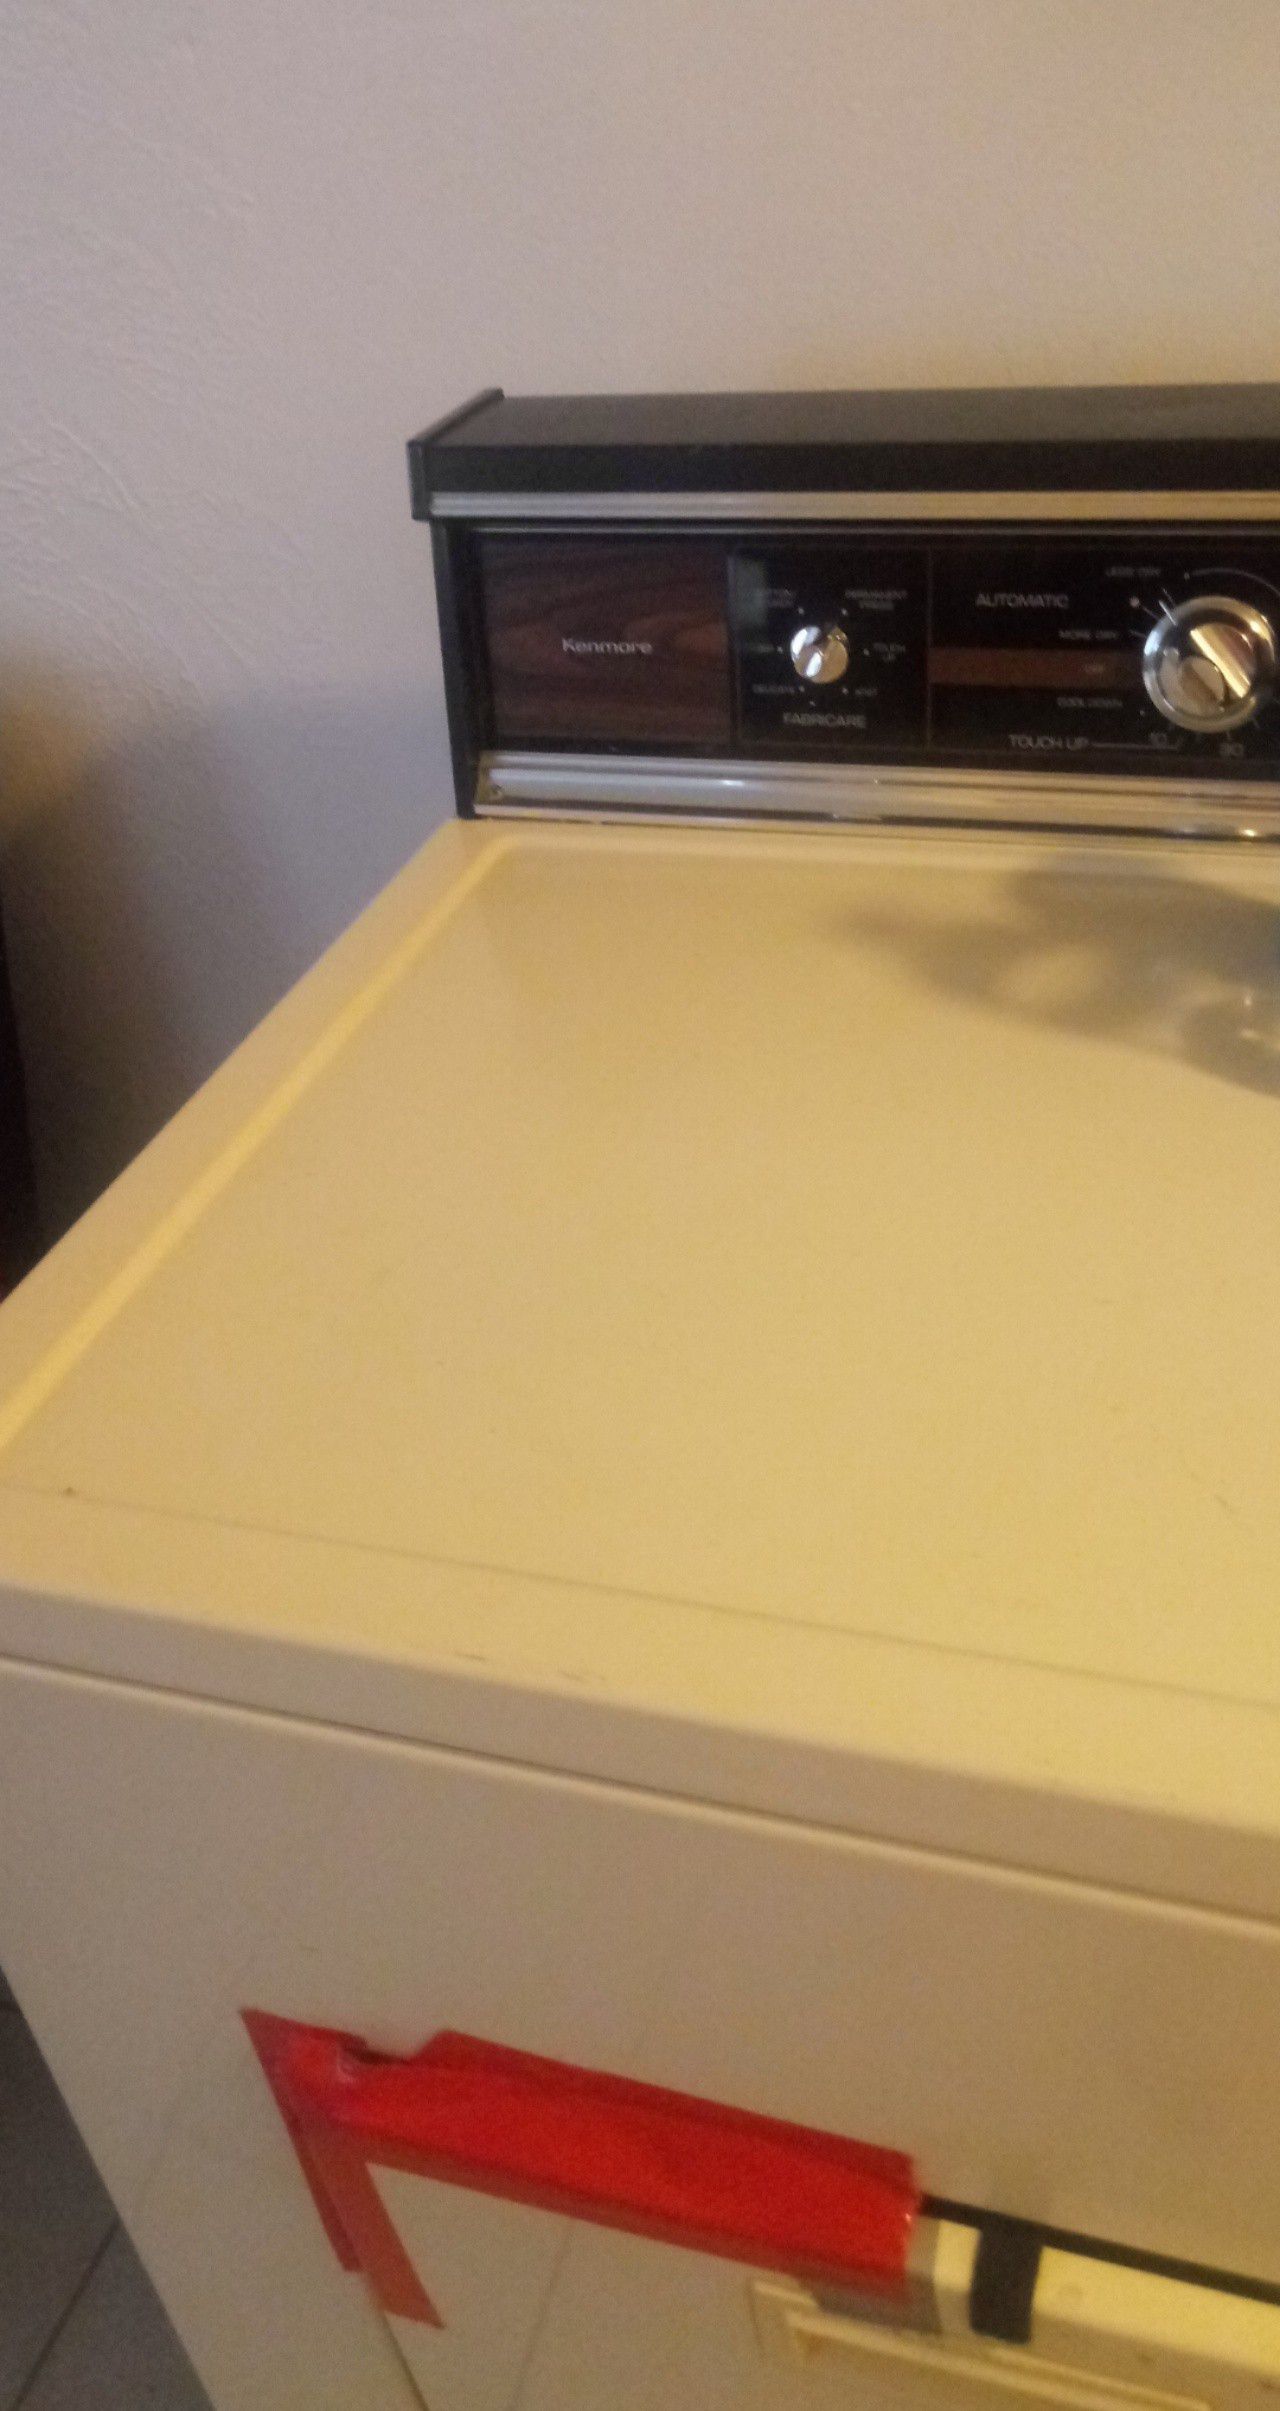 Washer dryer lettin both go for 60 lmk asap tryin to move they work great door dryer is missing screw i tsped it